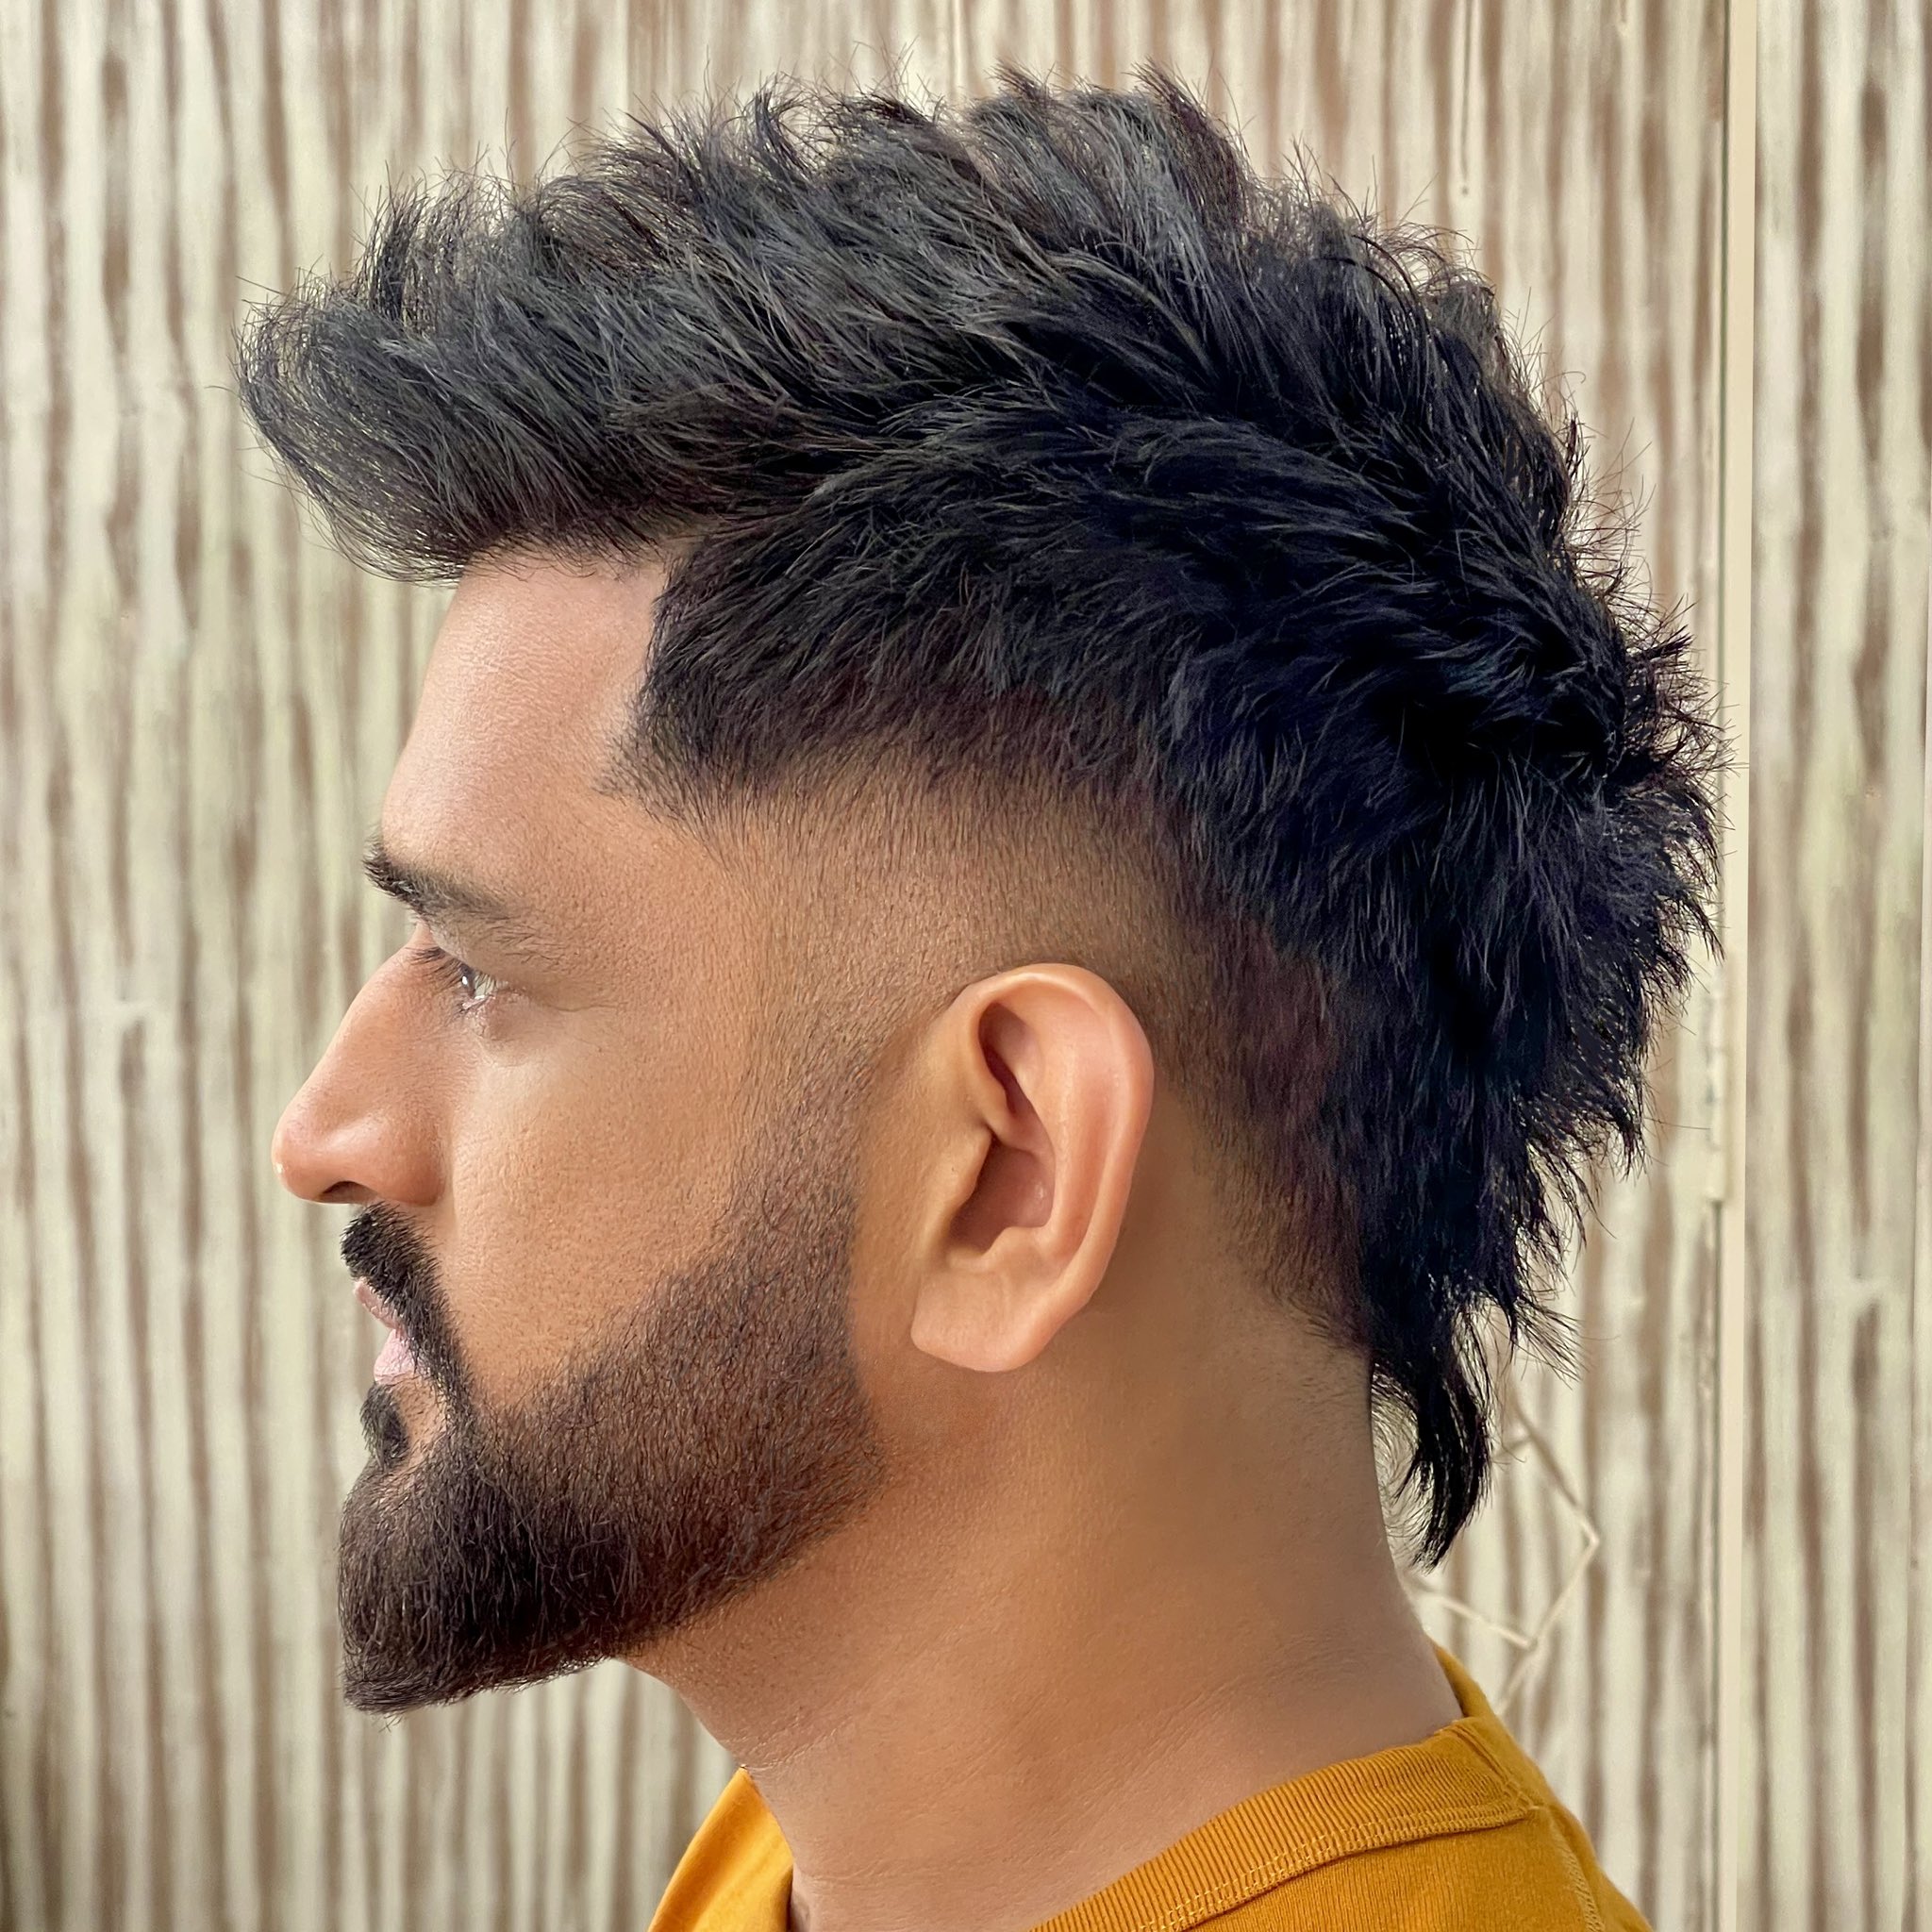 Dhoni’s new hairstyle surprise fans